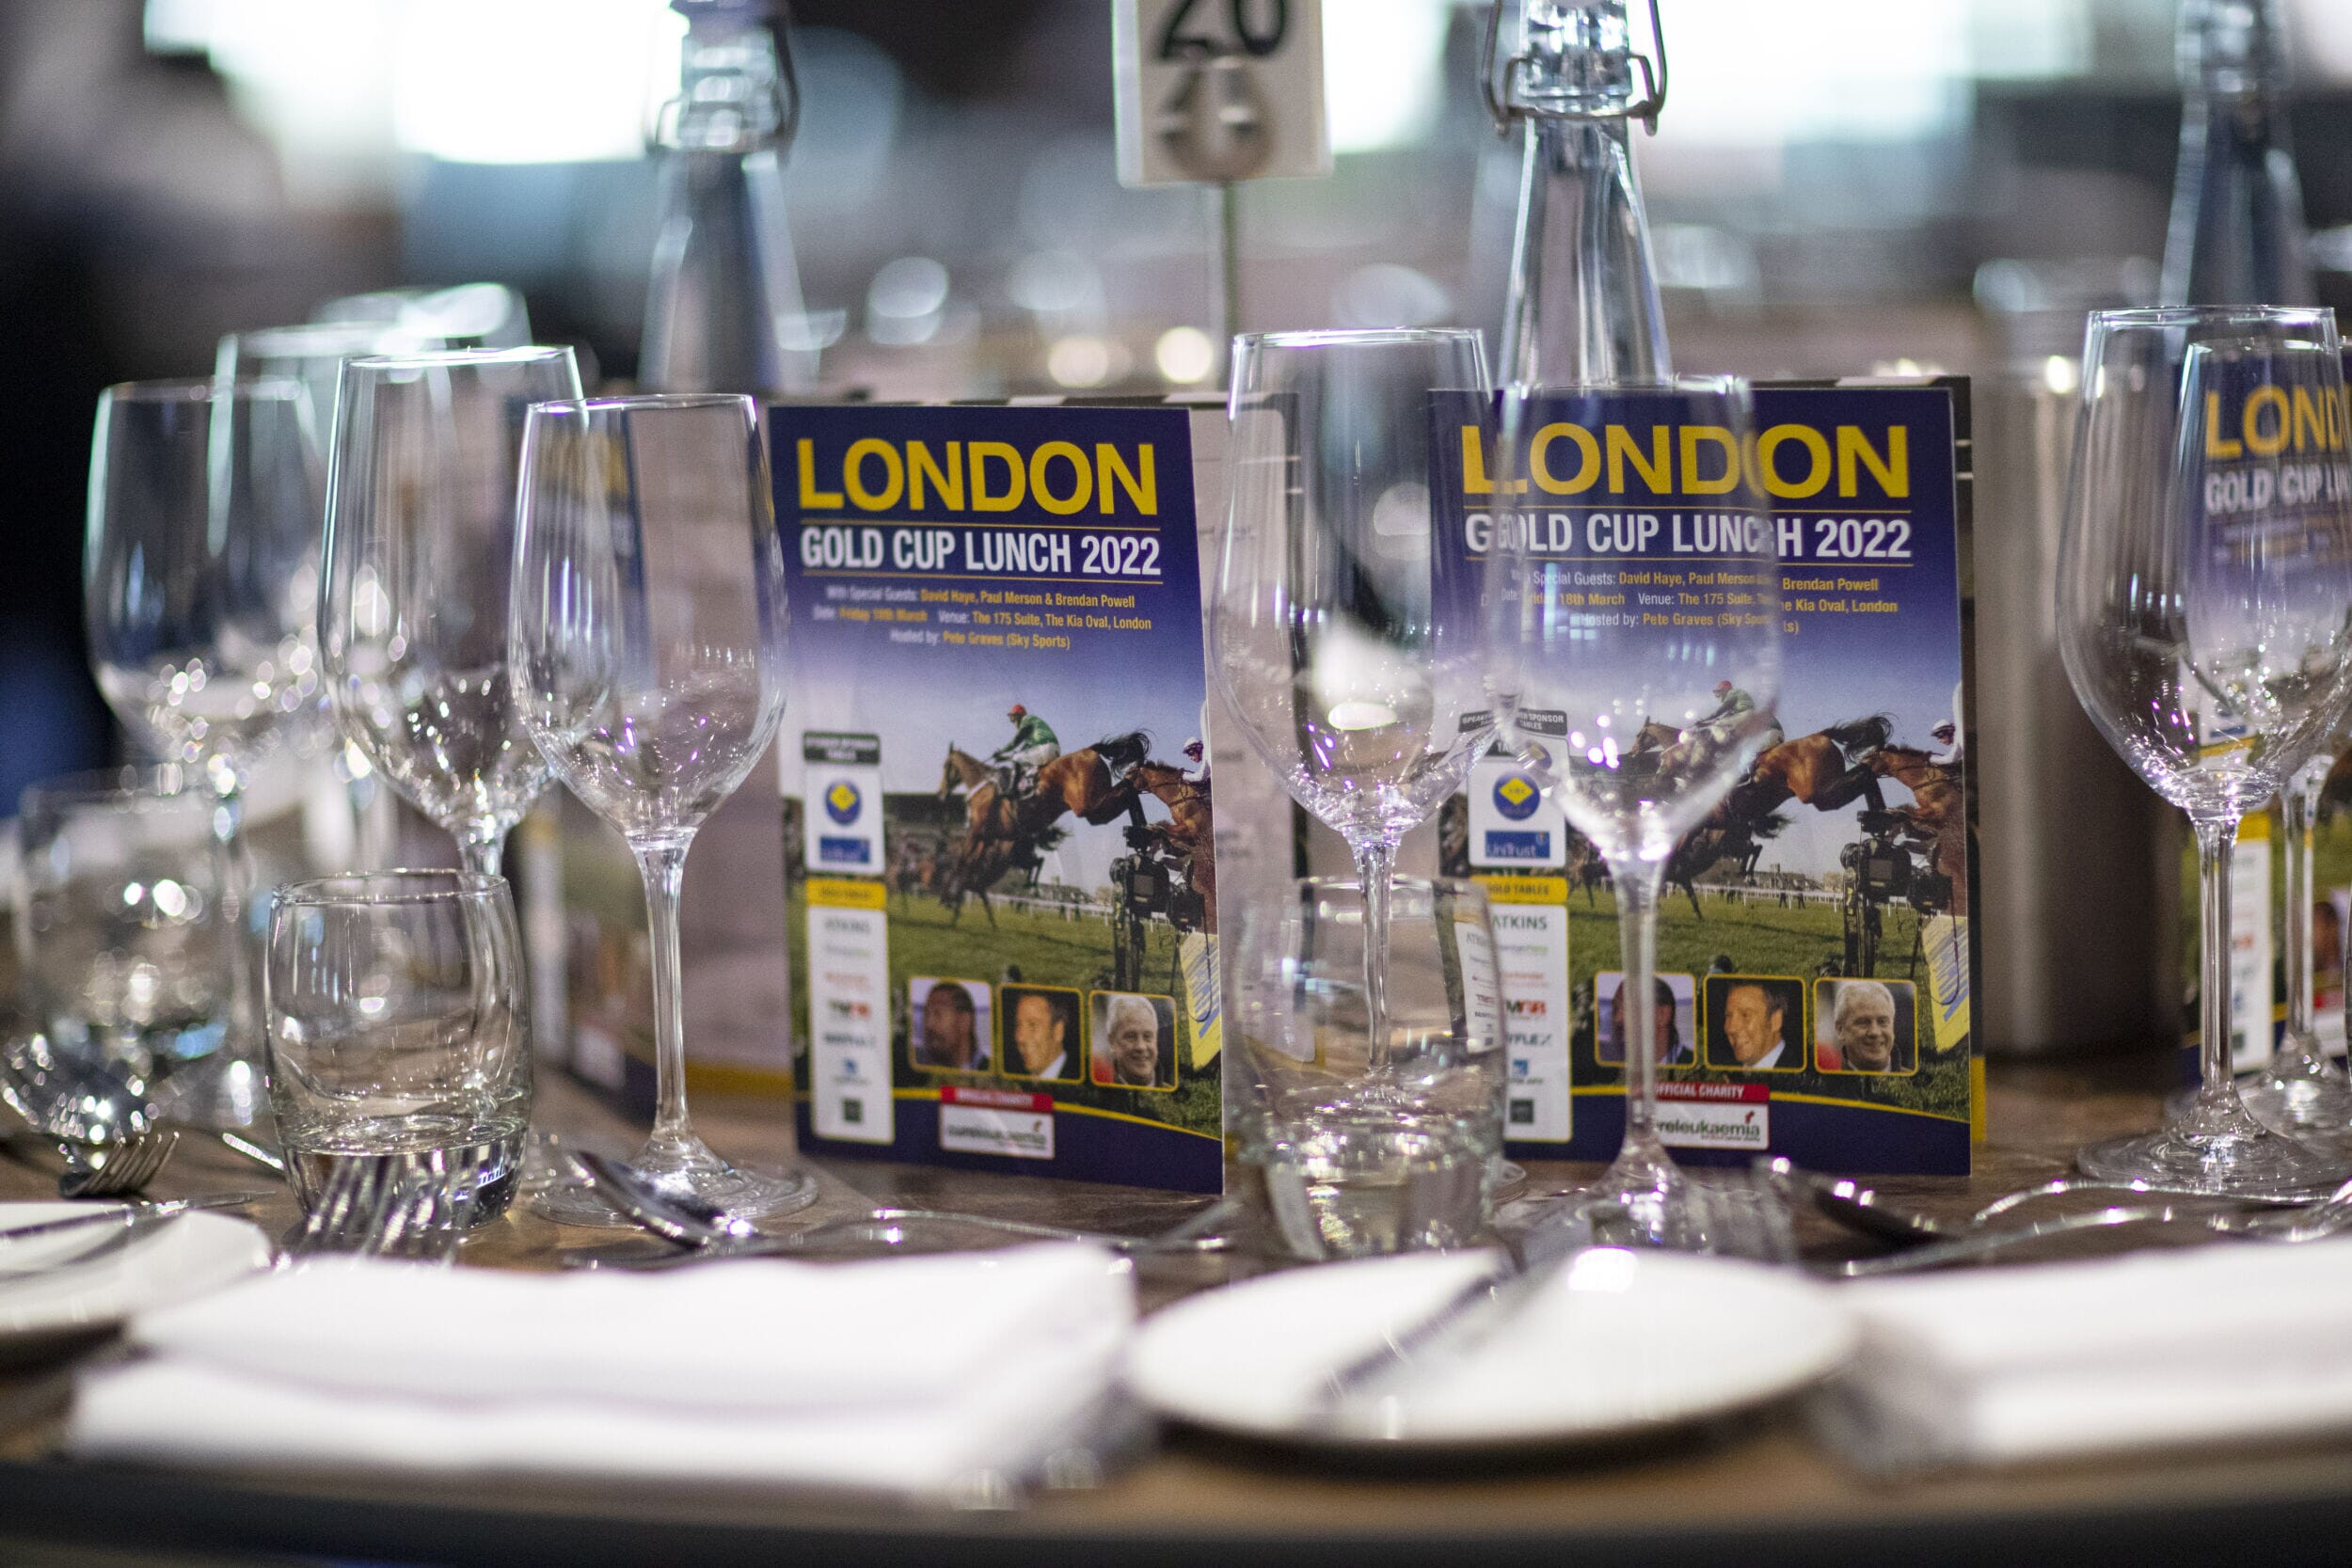 A table setting at the London Gold Cup lunch 2022